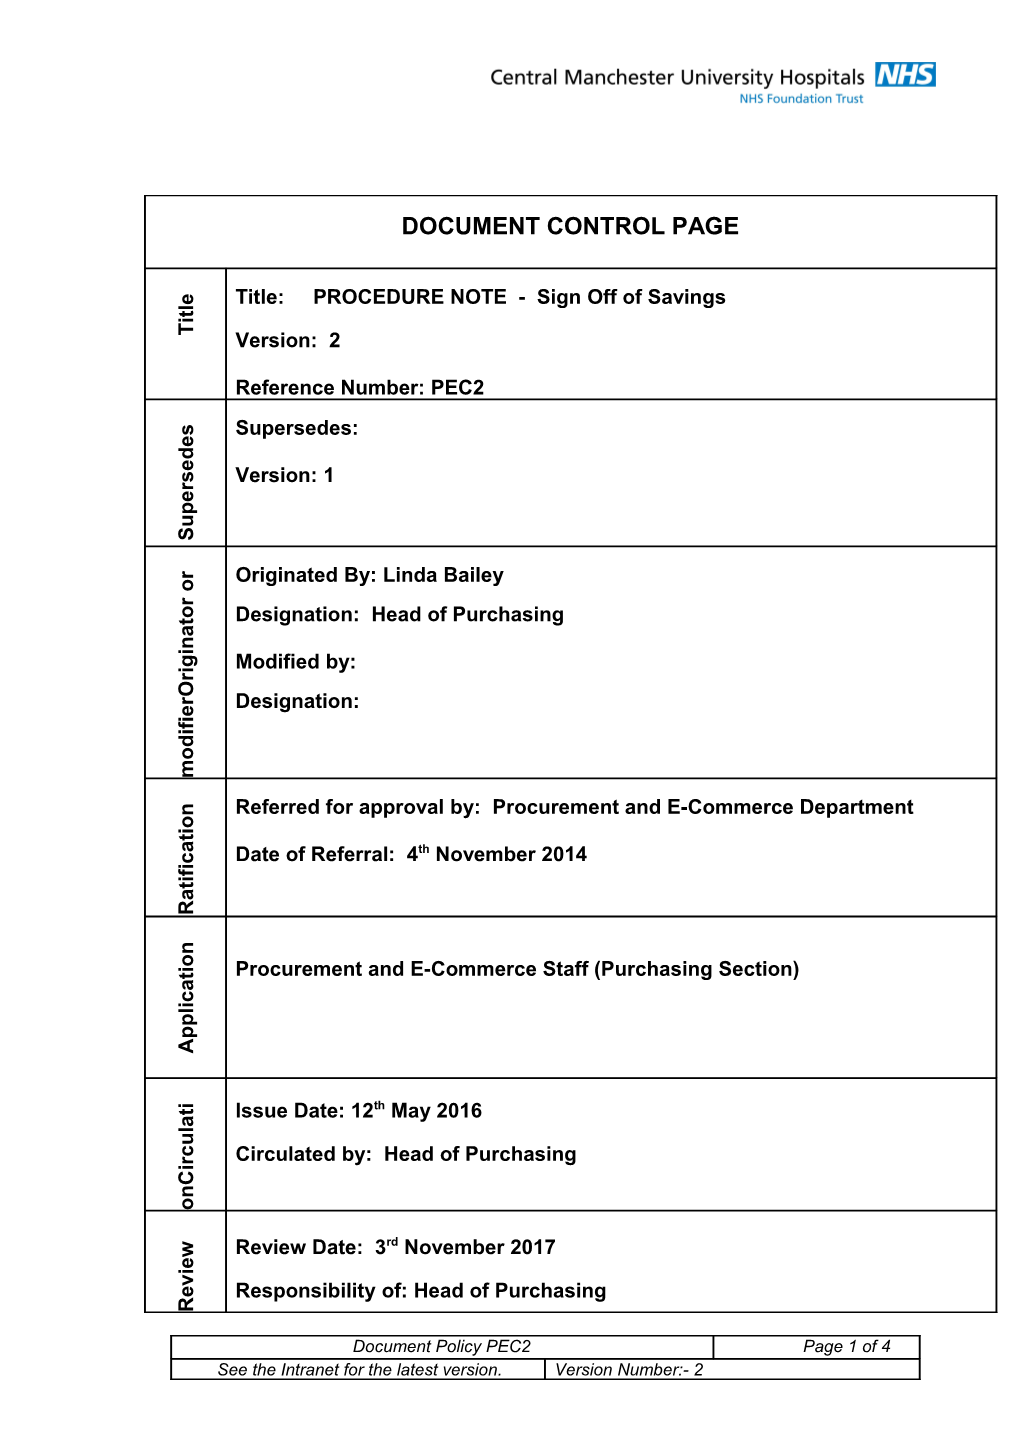 Document Control Page